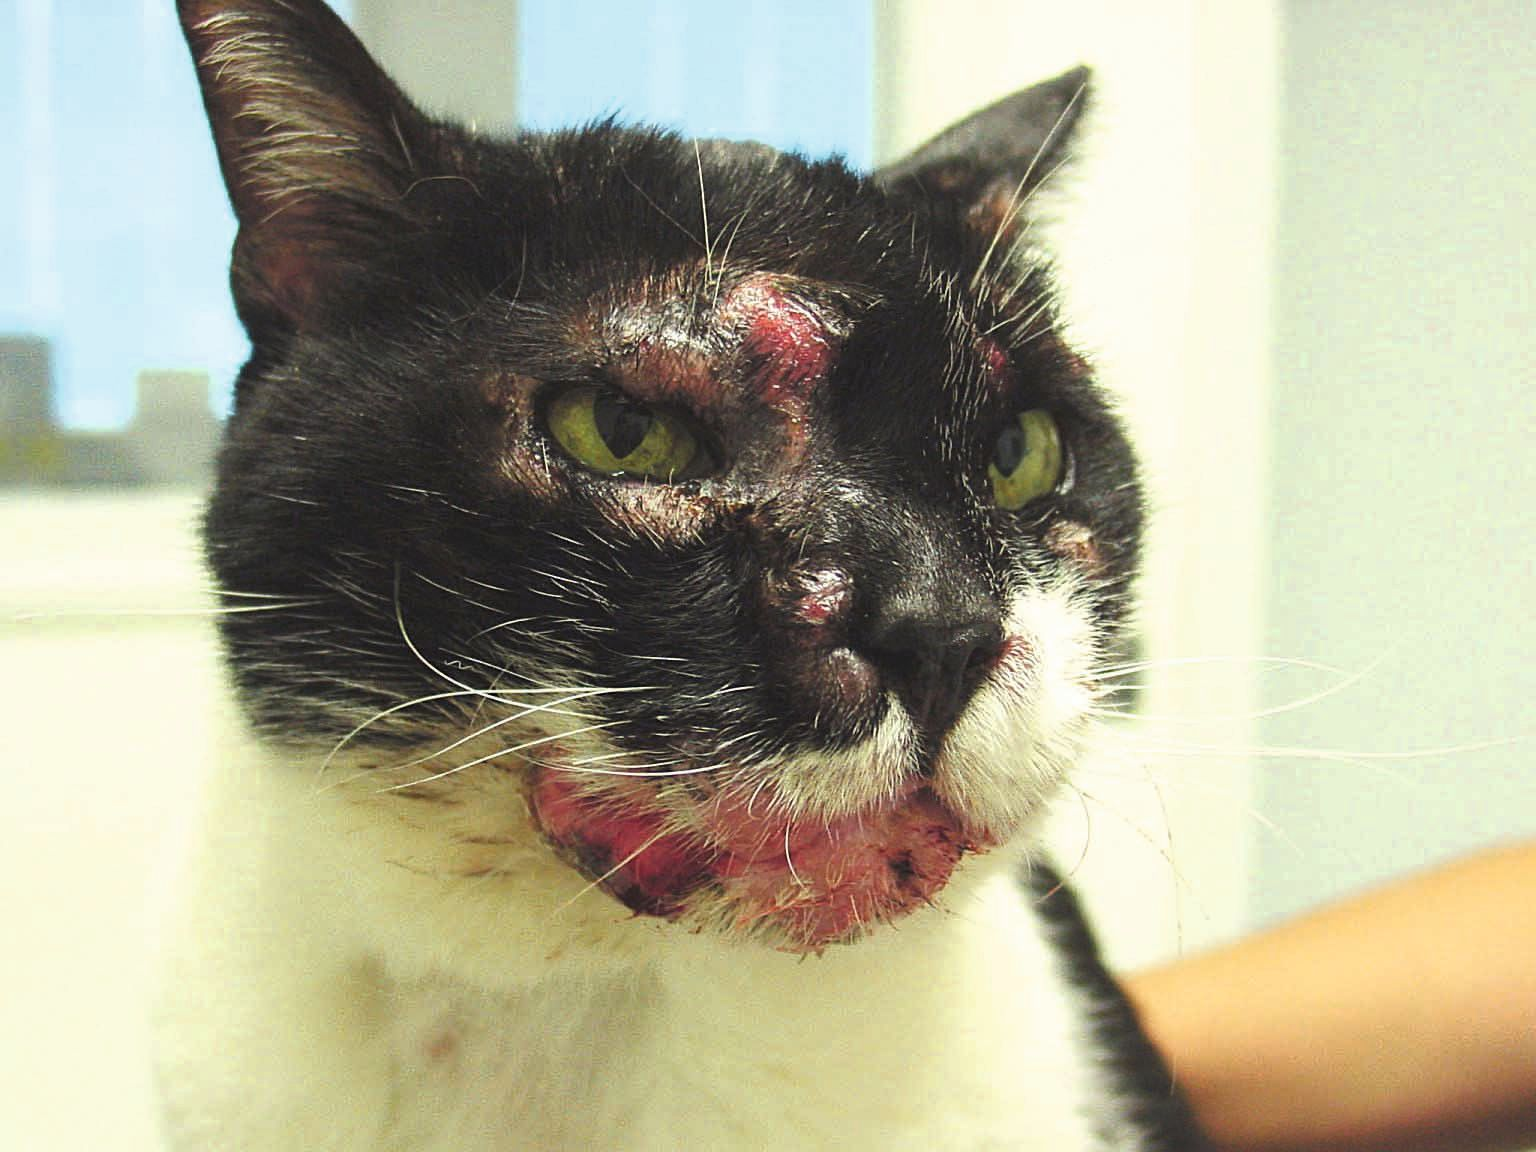 CNEL in a cat with facial distribution of multiple adjacent to coalescing plaques and nodules.